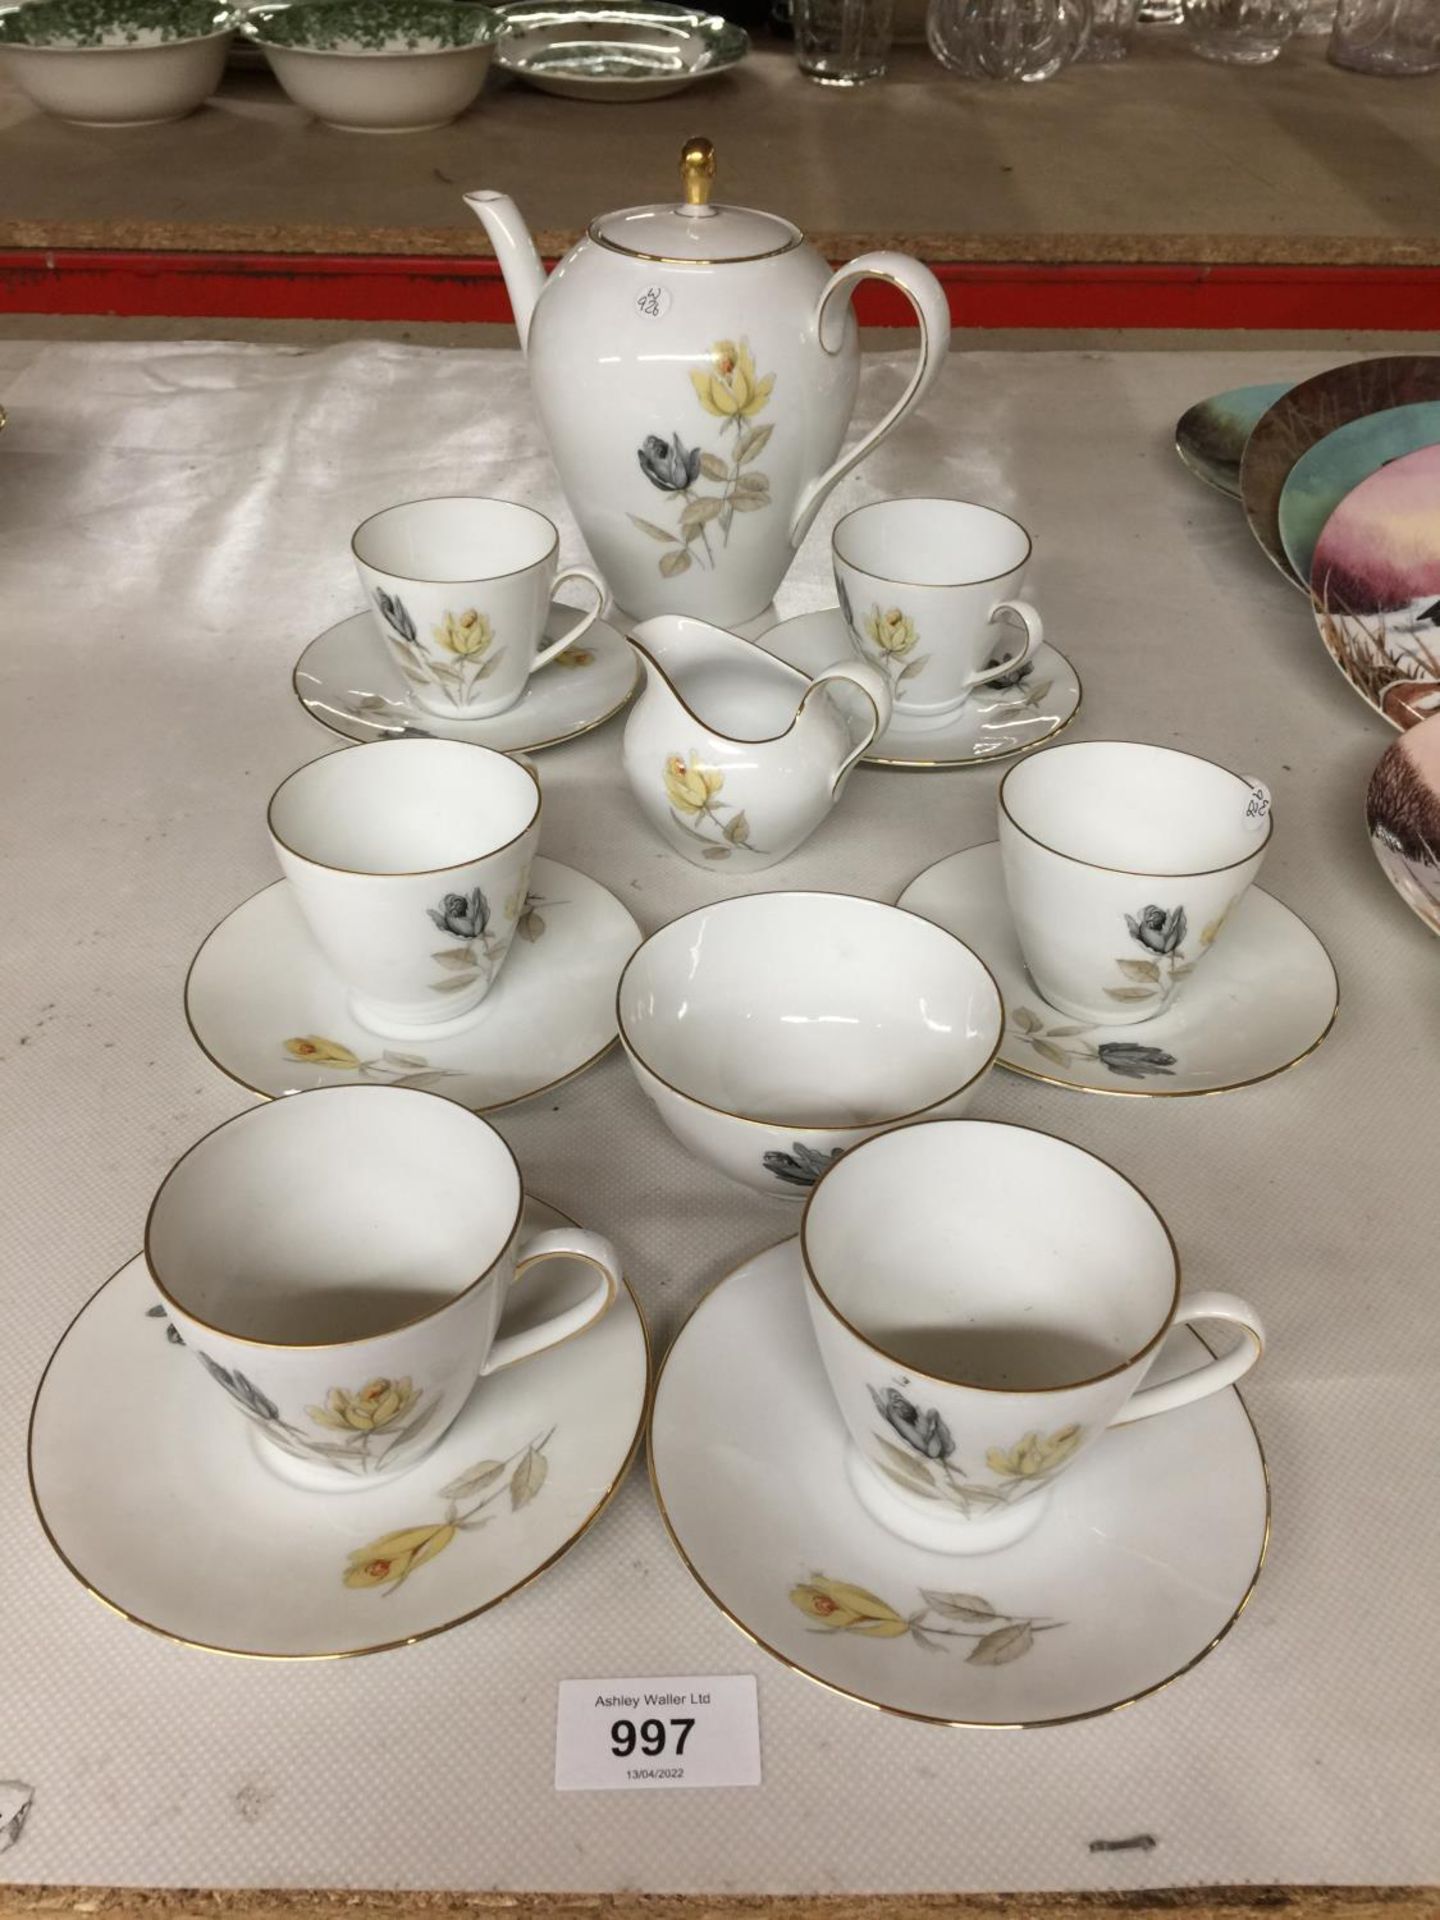 A BAVARIAN GERMANY CHINA TEASET WITH FLOWER PATTERN COMPRISING OF CUPS AND SAUCERS, TEAPOT, CREAM